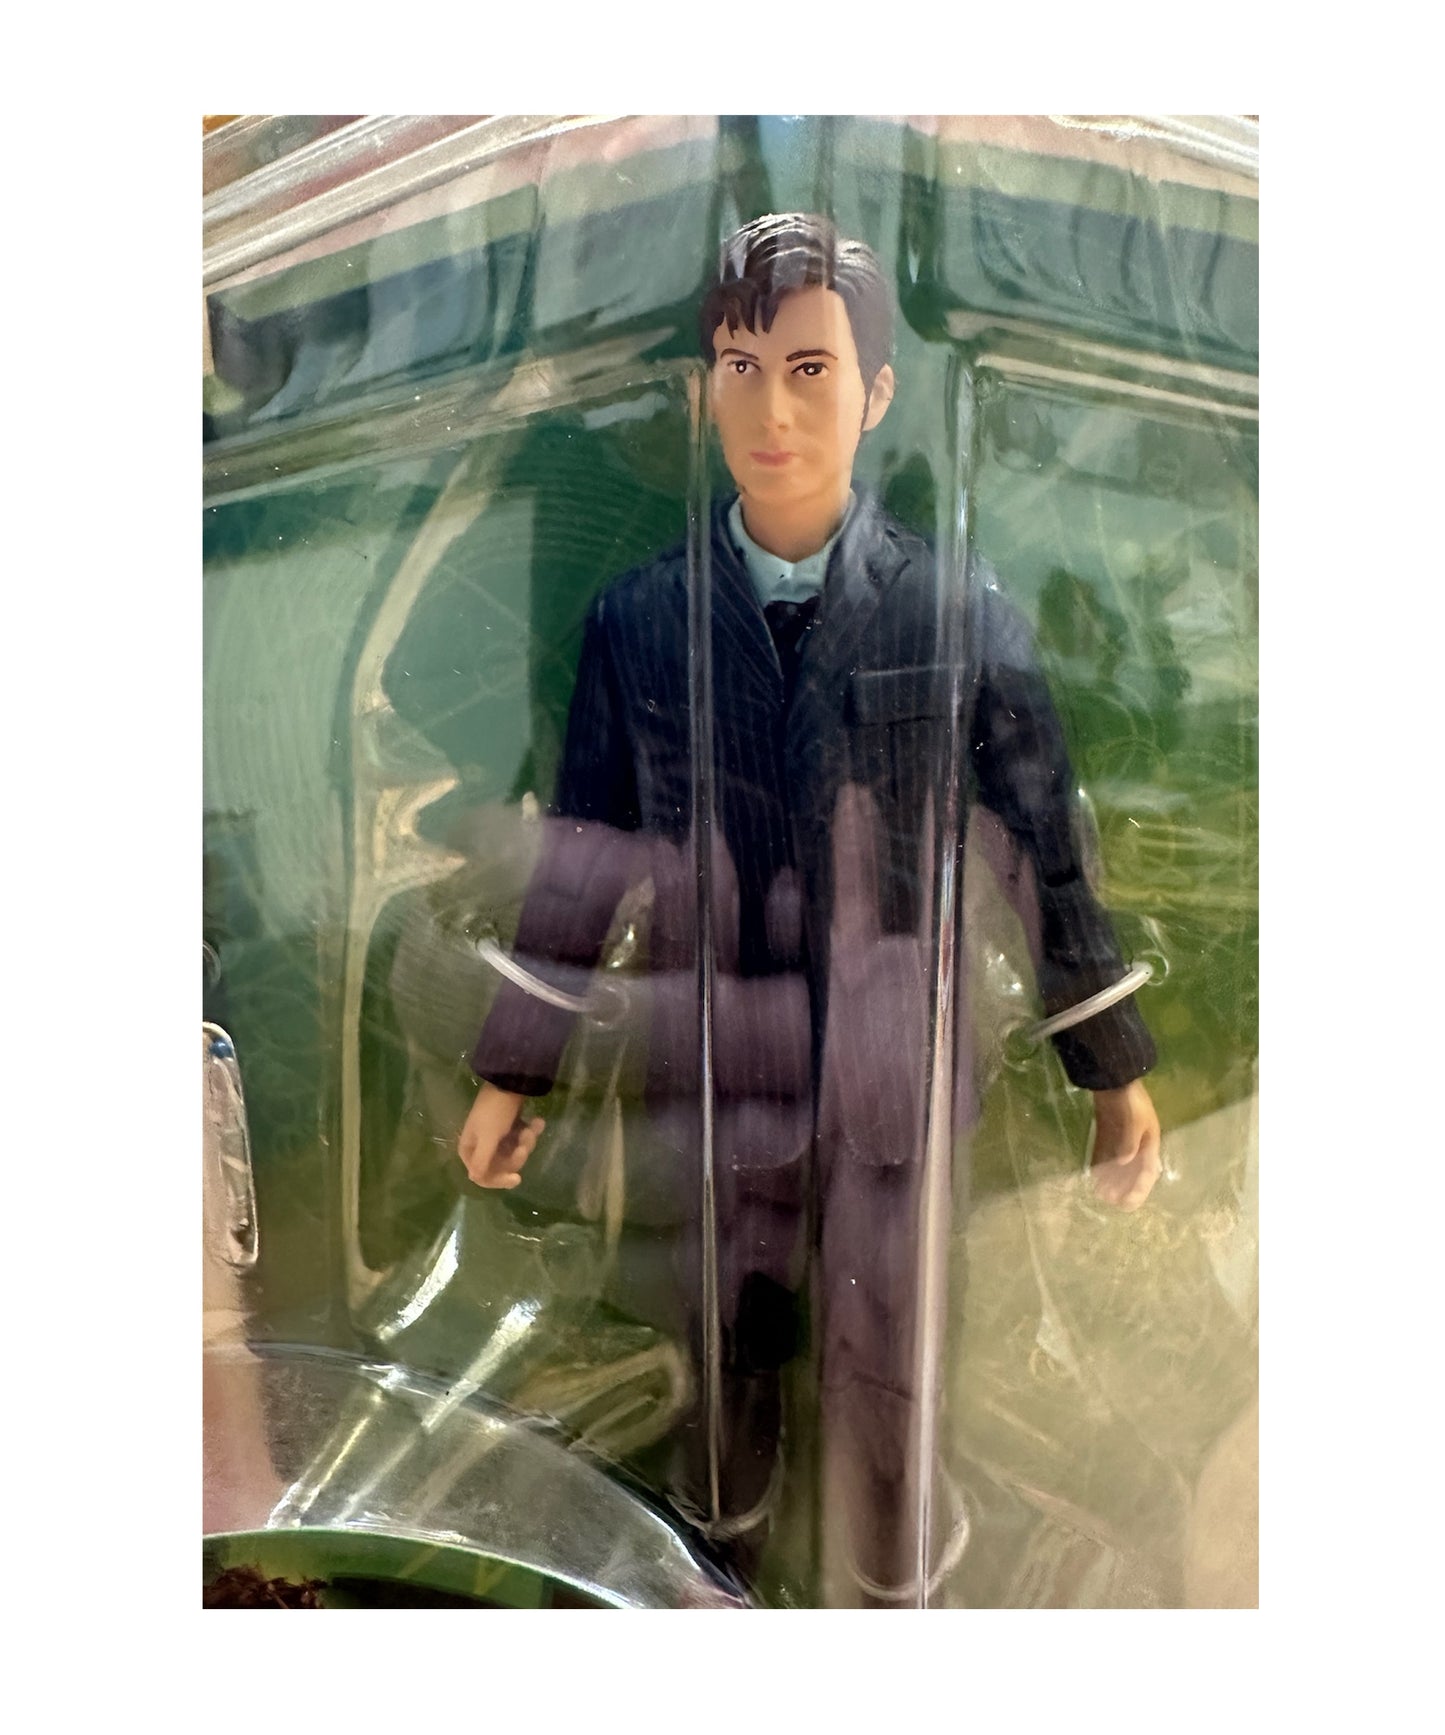 Vintage 2007 Dr Doctor Who Series 3 The 10th Doctor In Highly Detailed Poseable Action Figure (Very Rare Non Glasses Variant) - Brand New Factory Sealed Shop Stock Room Find